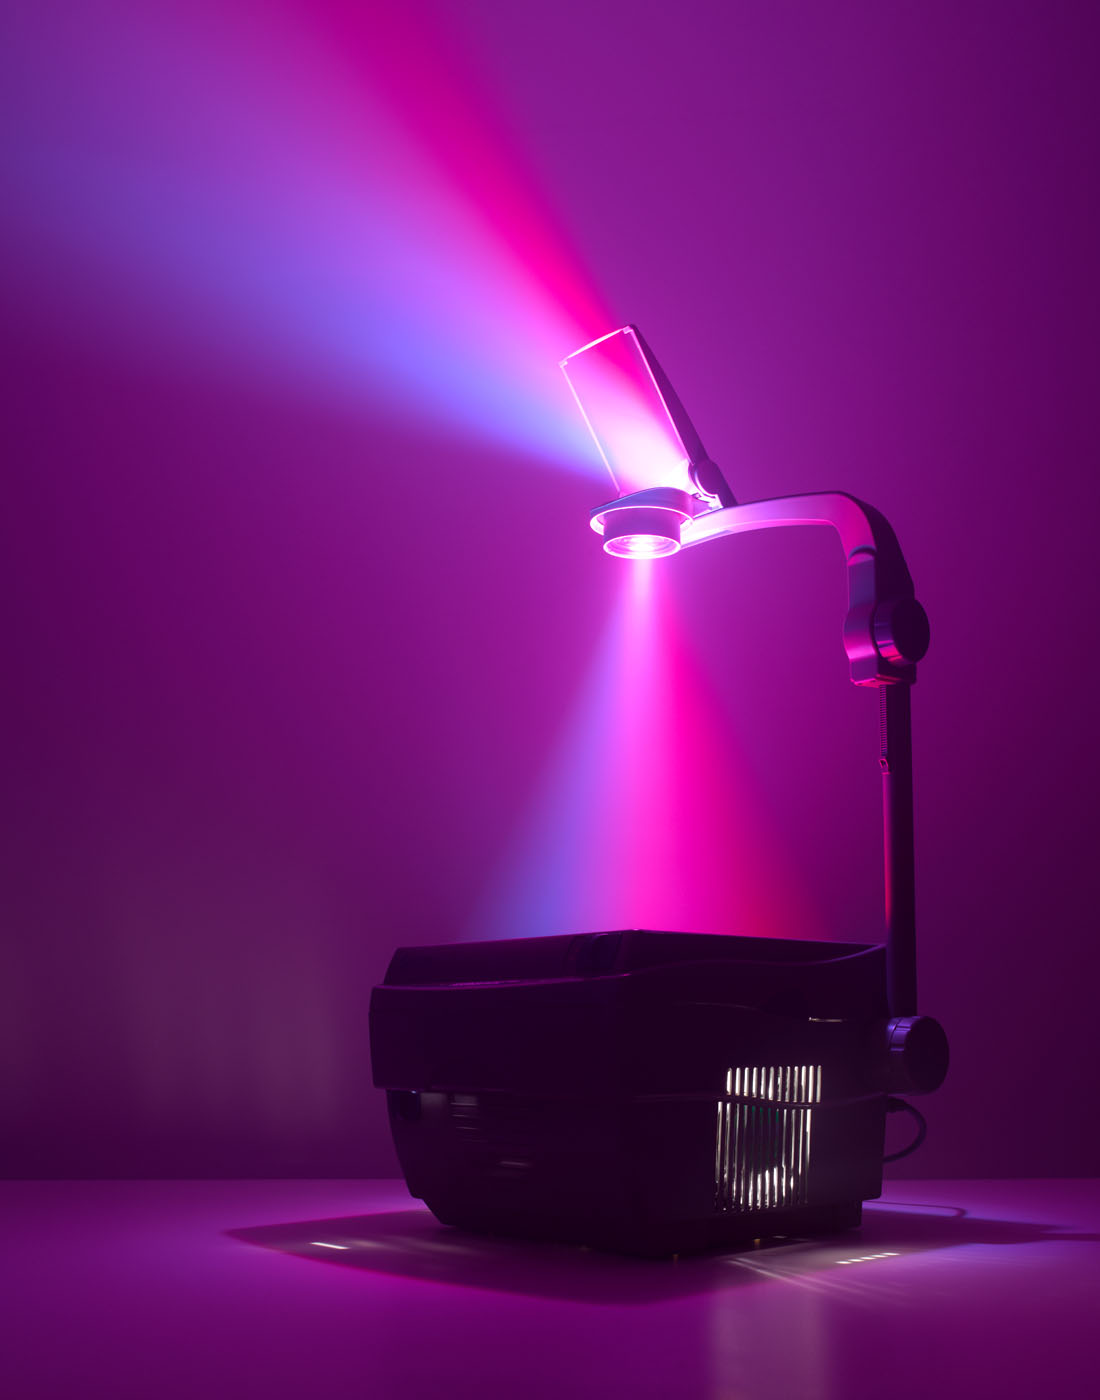 Bright pink light beam by Alexander Kent London based still life and product photographer.